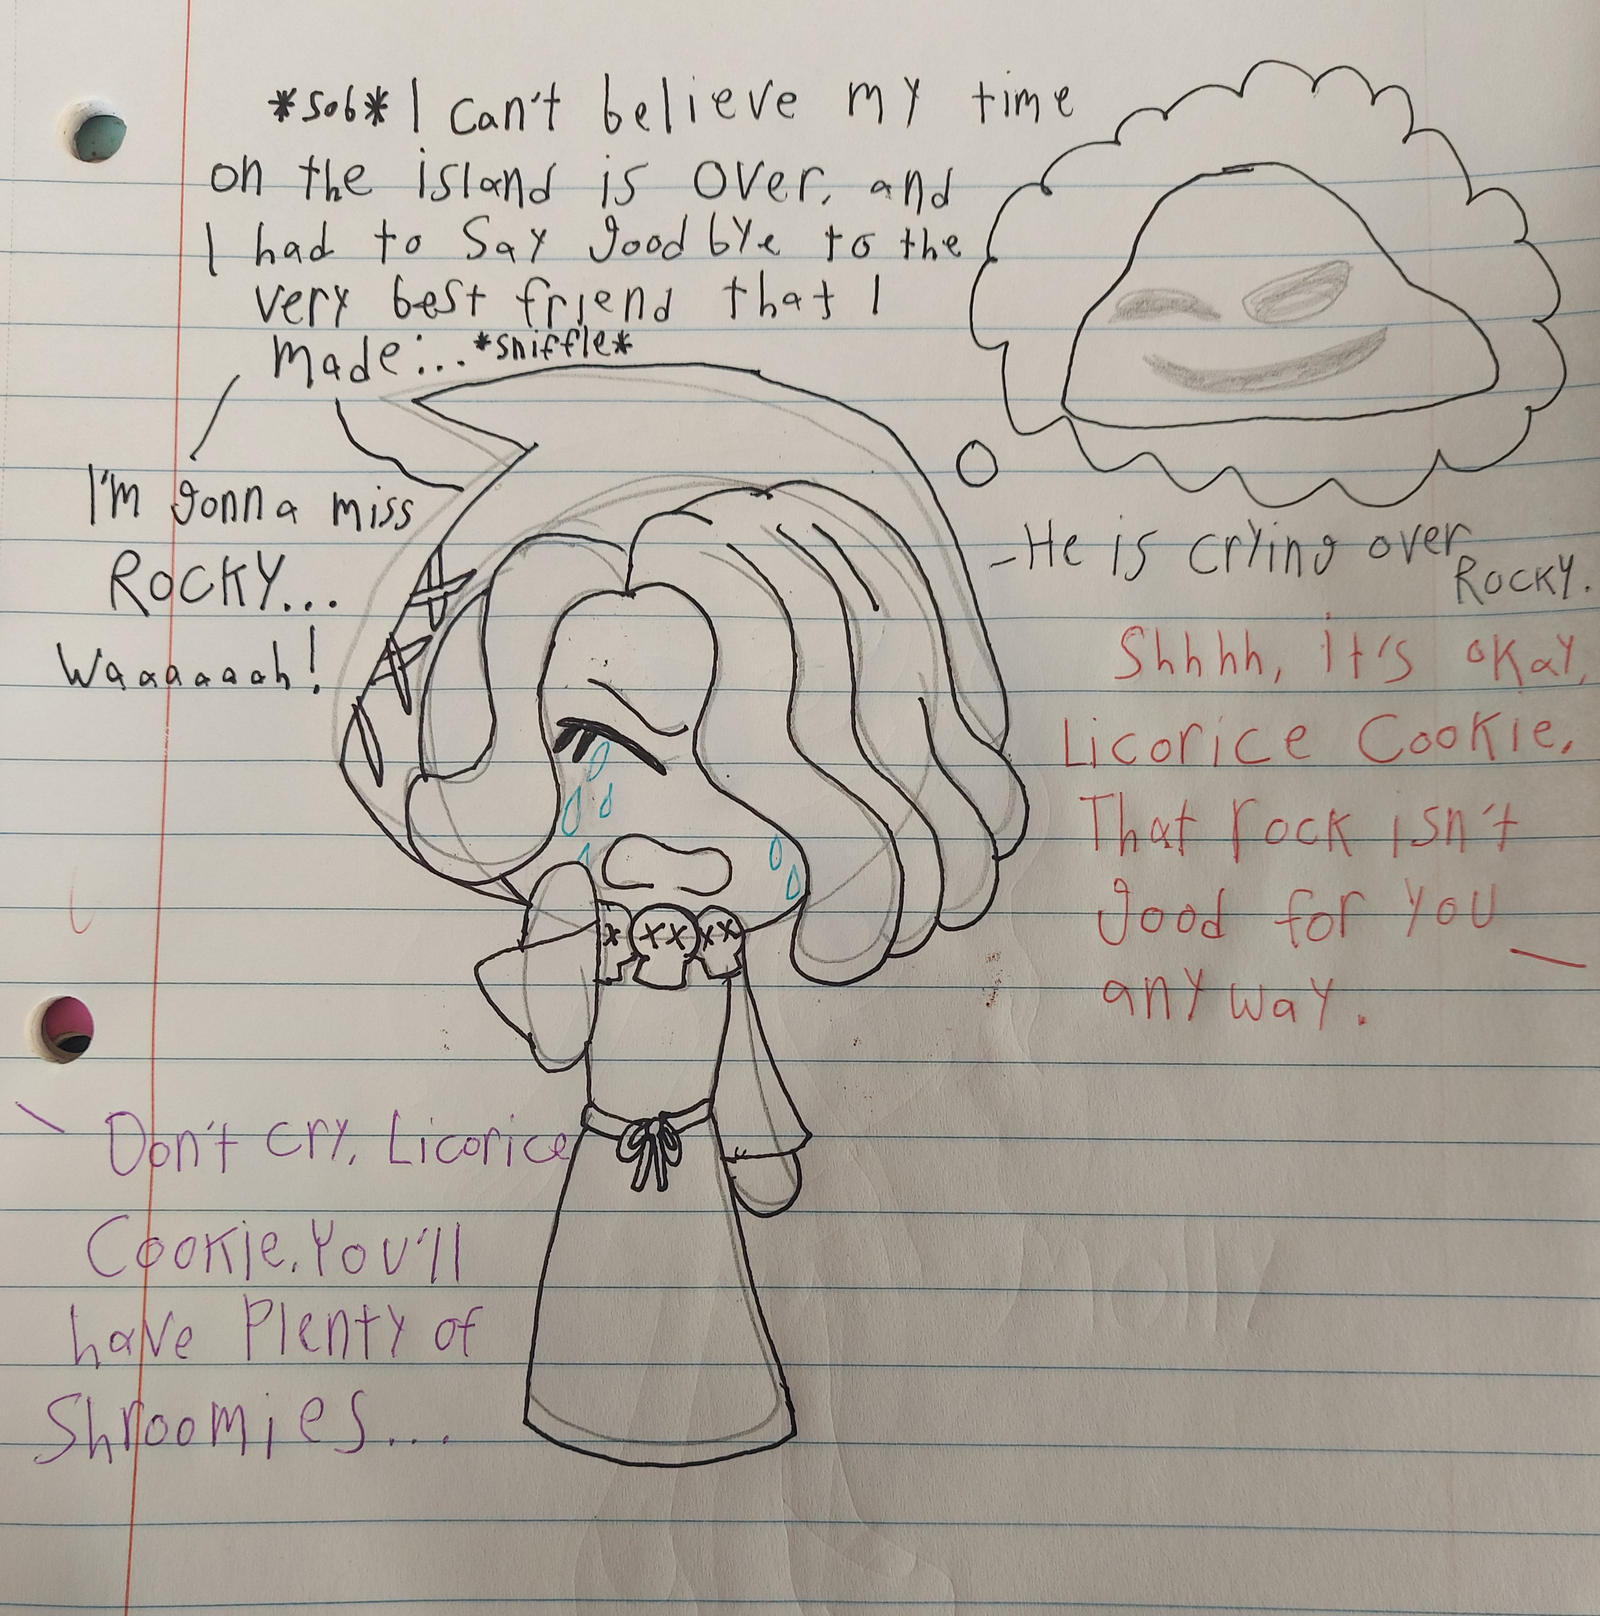 CRK - Licorice Cookie Misses Rocky by Arrienne-408 on DeviantArt